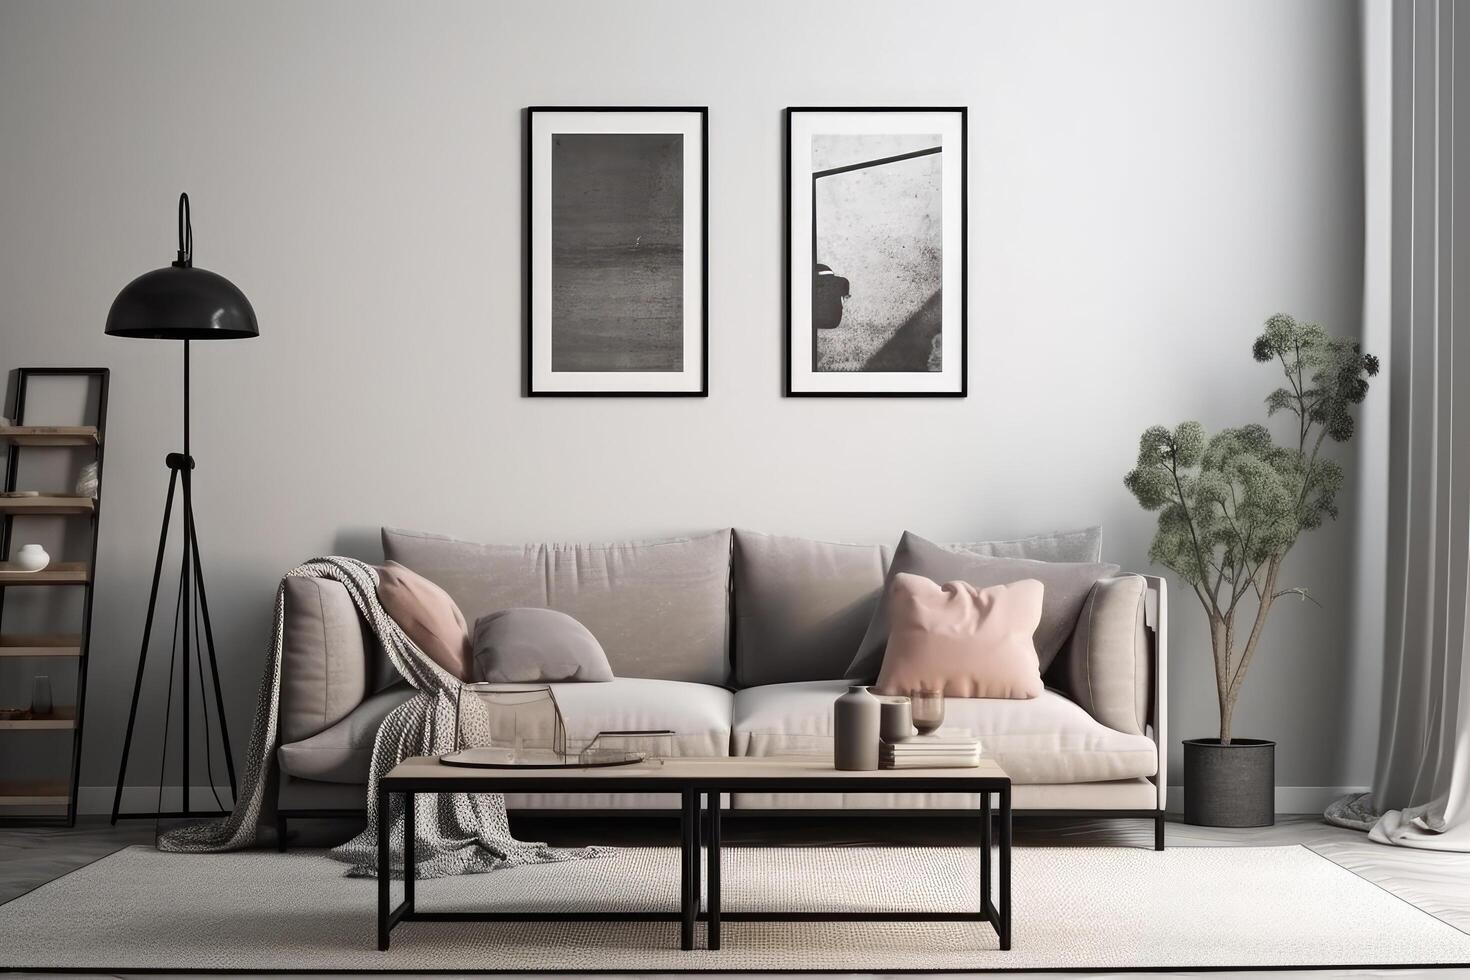 Modern living room interior with sofa, coffee table and posters on wall, Double mockup poster frame on the wall in a livingroom, photo